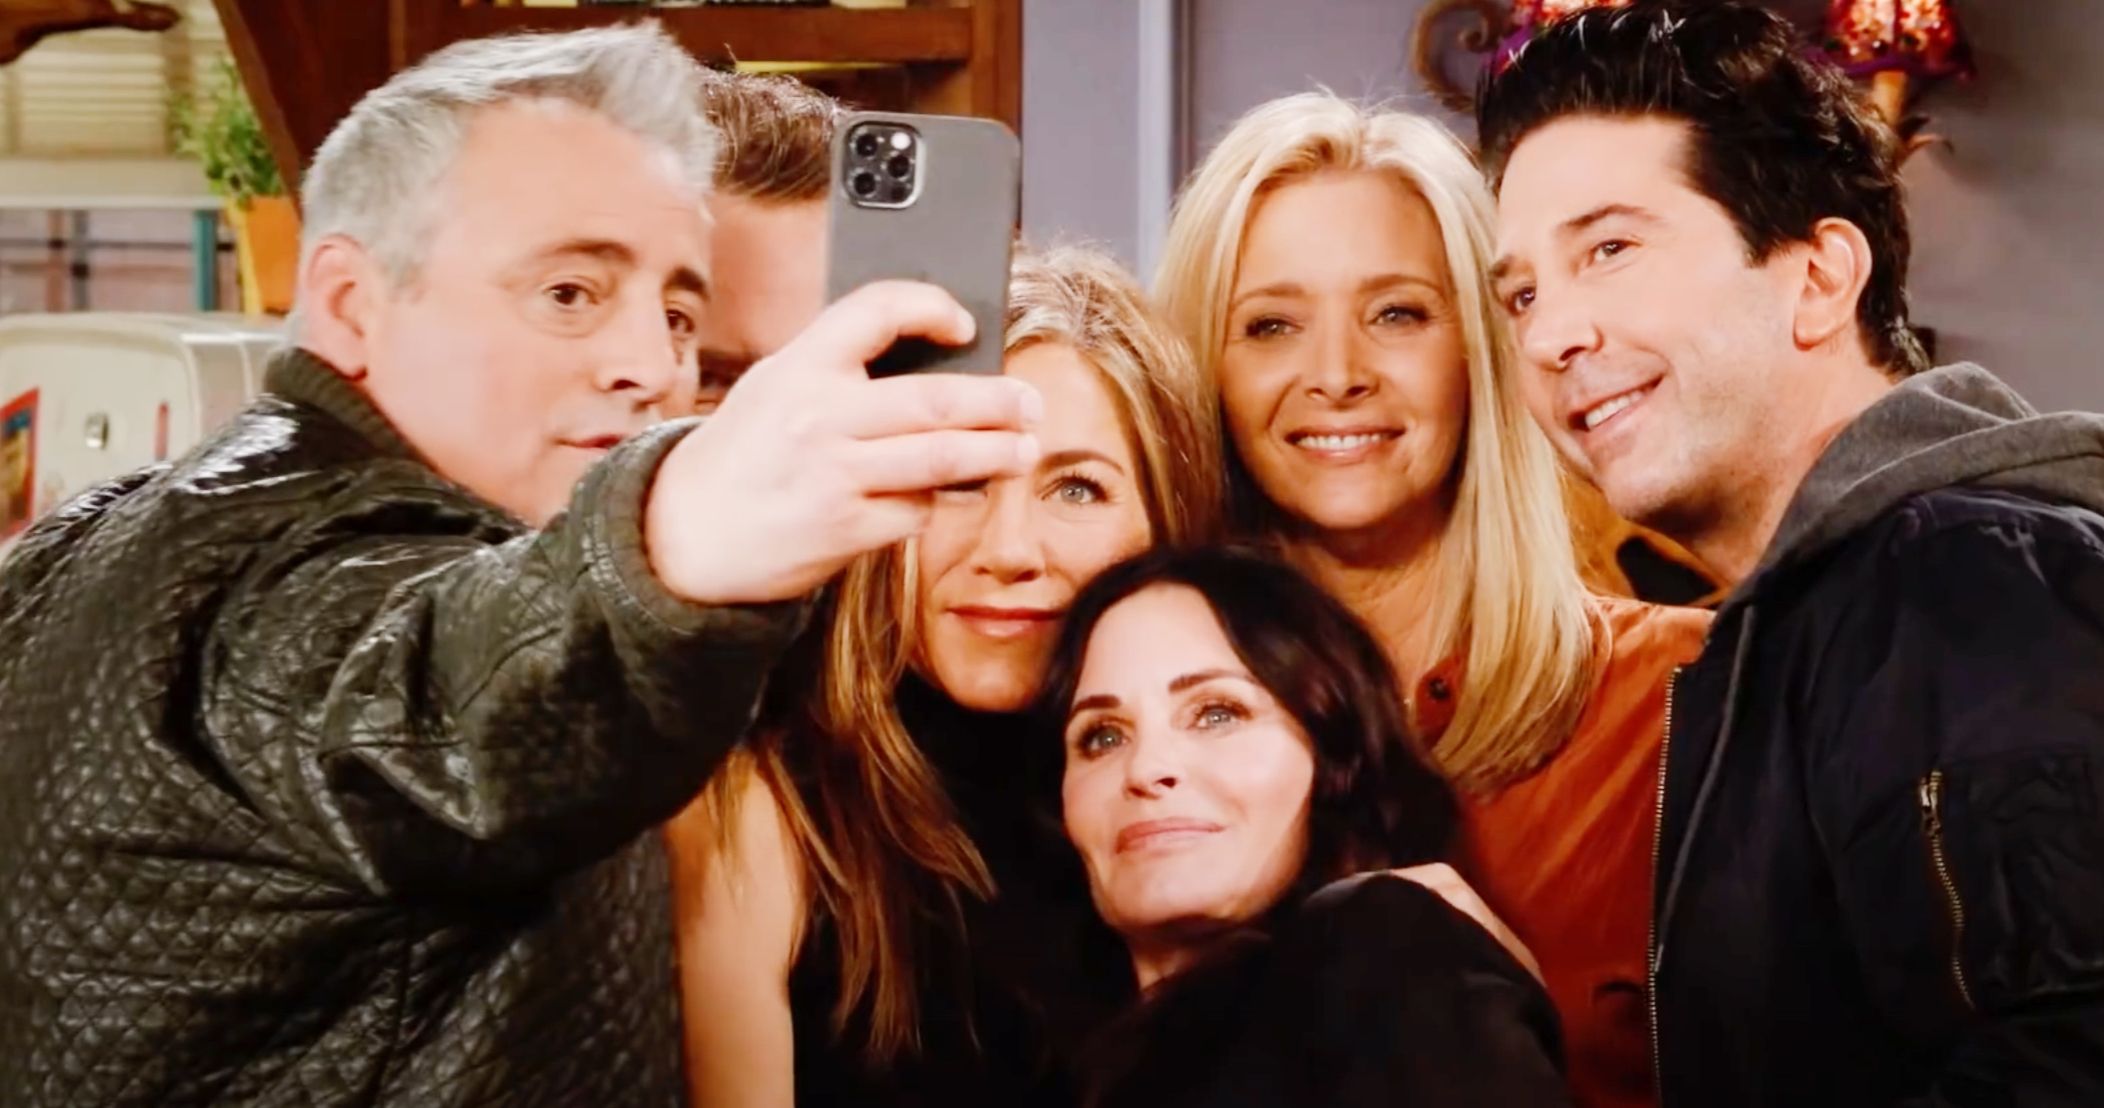 Friends The Reunion Trailer Arrives, The Cast Returns on HBO Max This